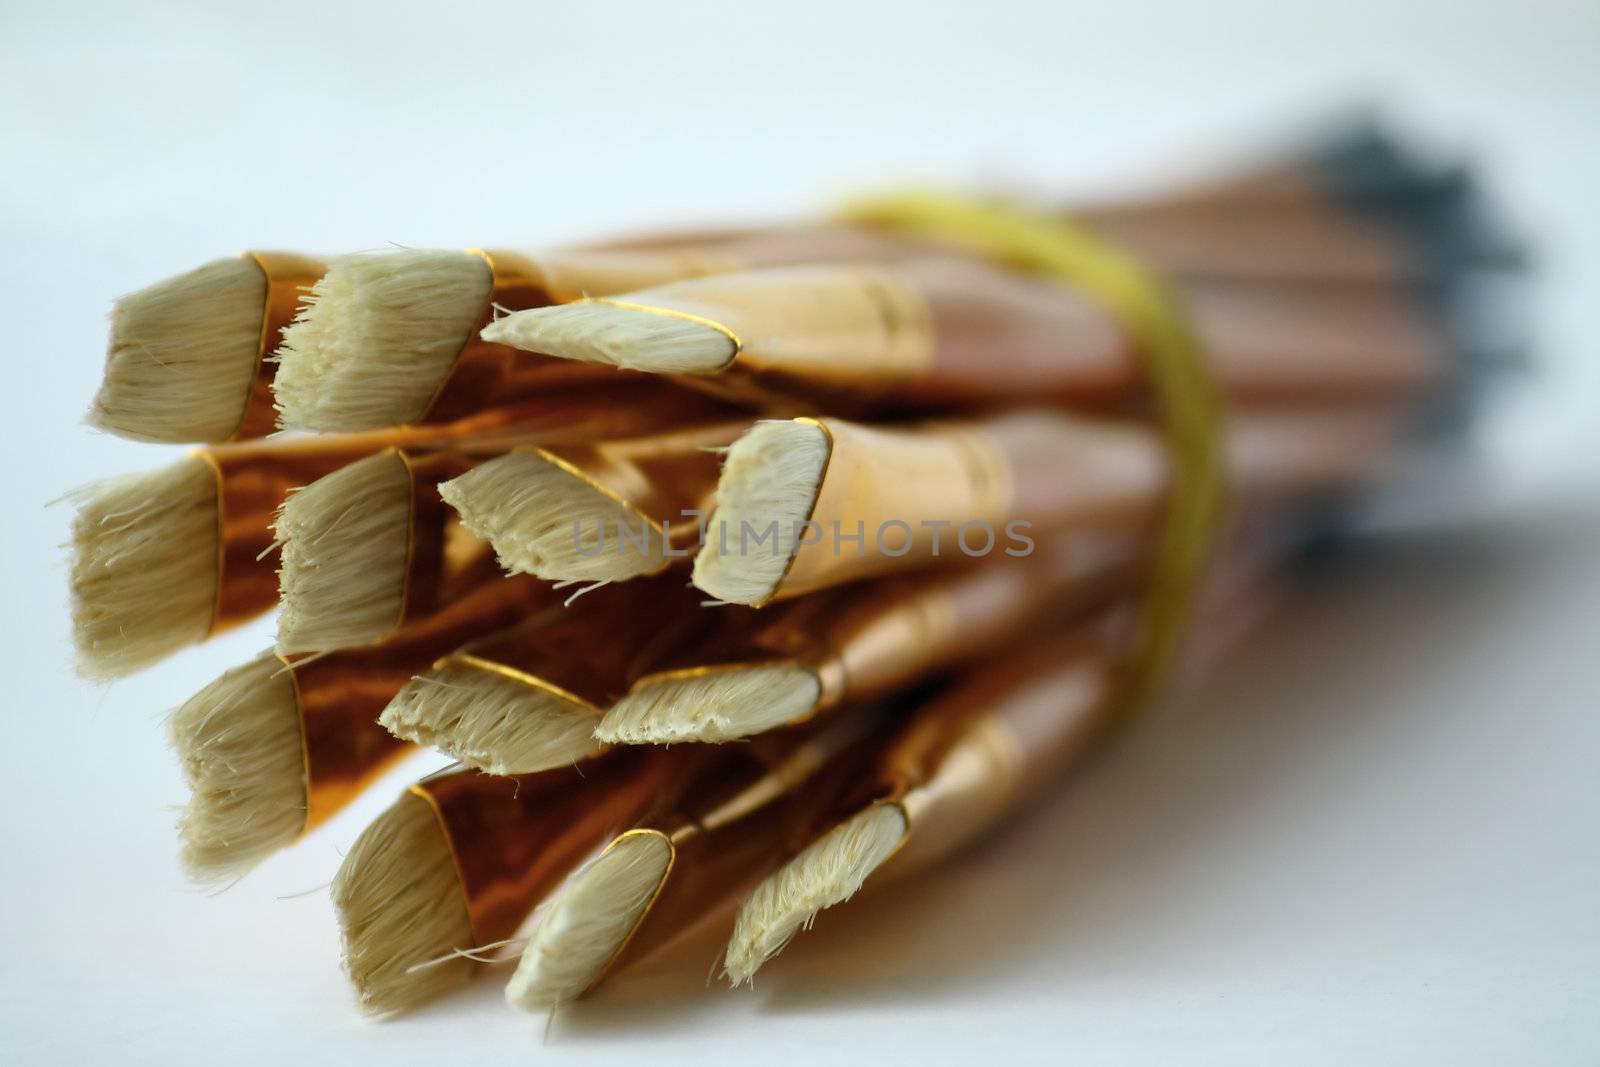  Yellow brushes for drawing on white background (isolated) ** Note: Slight blurriness, best at smaller sizes